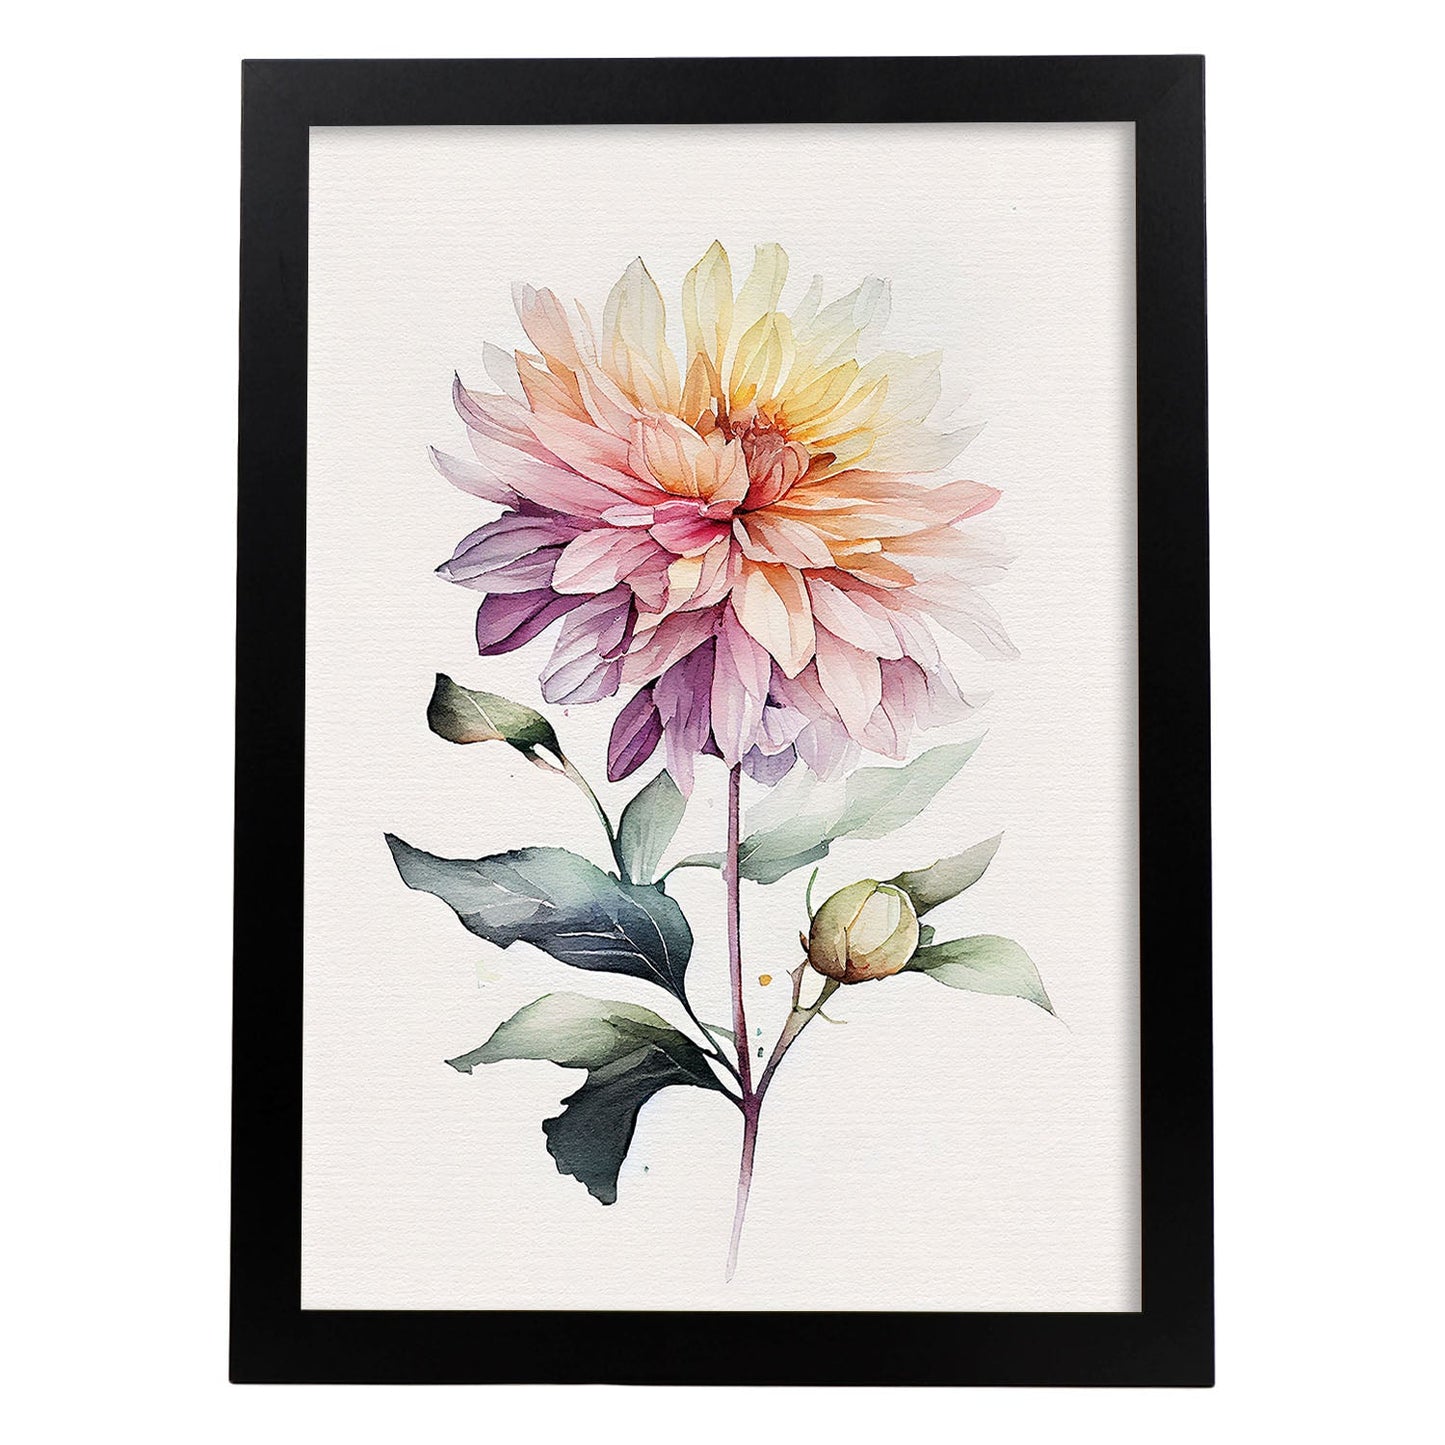 Nacnic watercolor minmal Dahlia_1. Aesthetic Wall Art Prints for Bedroom or Living Room Design.